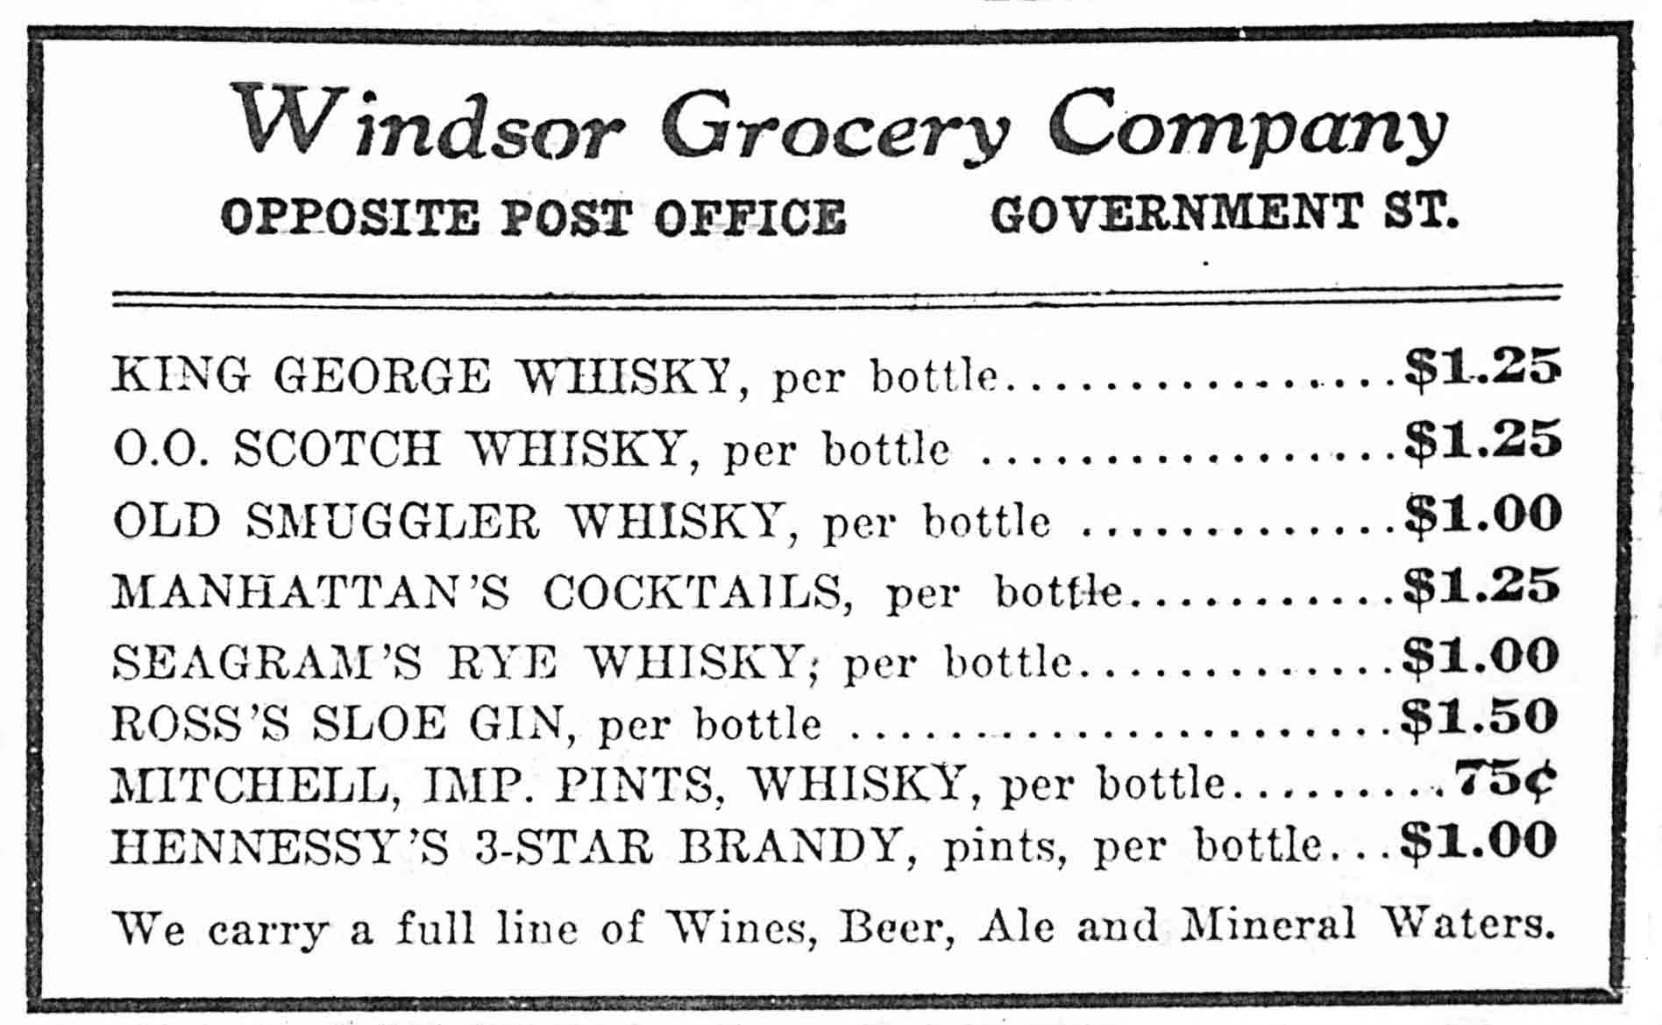 1912 advertisement for the Windsor Grocery, which was located in the Metropolitan Building